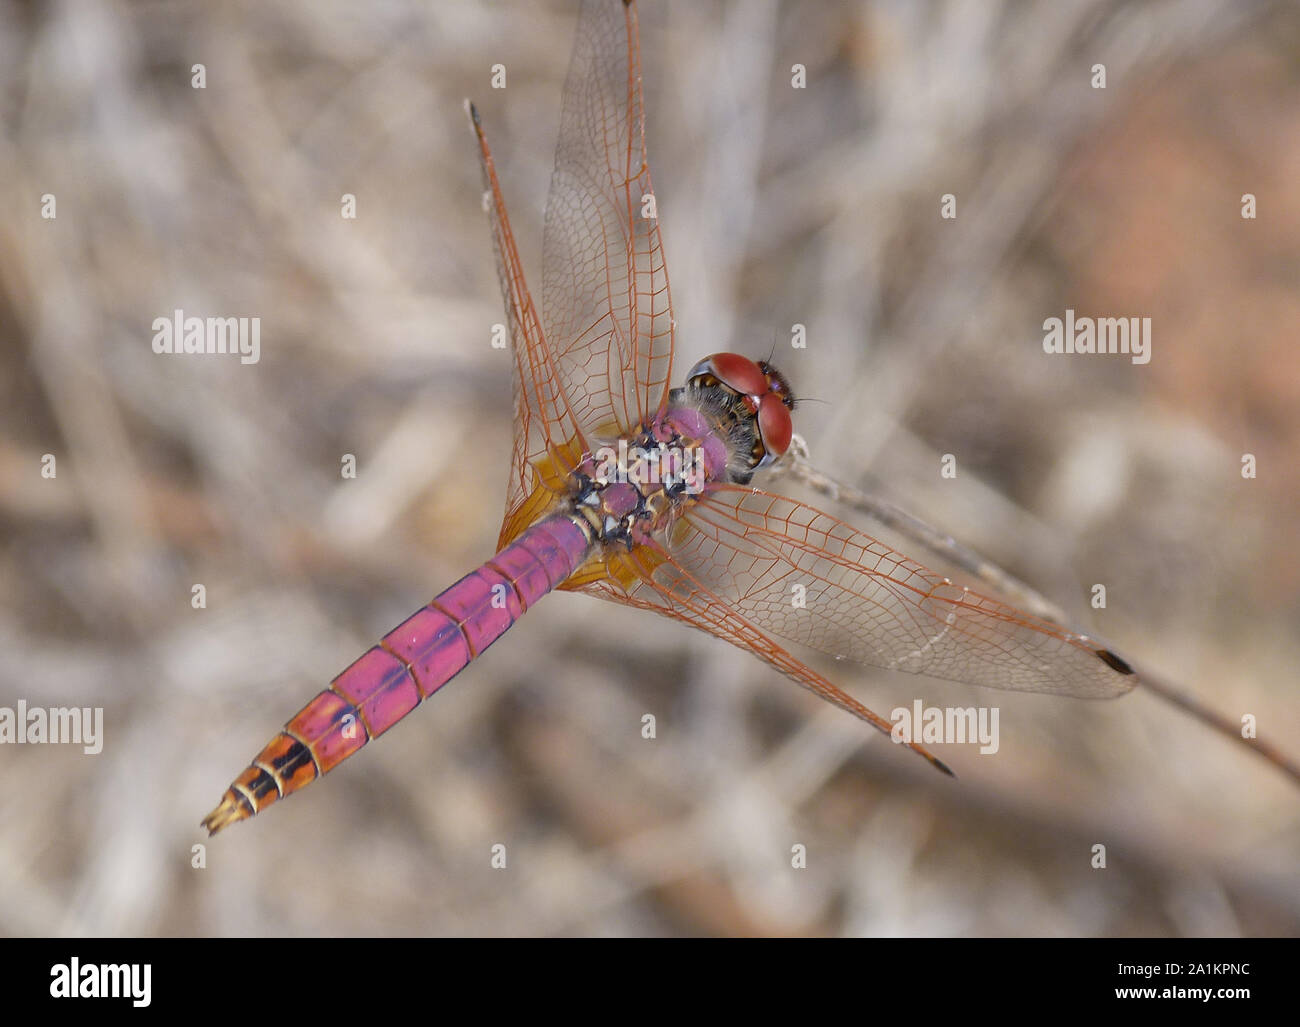 Dragon-fly Banque D'Images